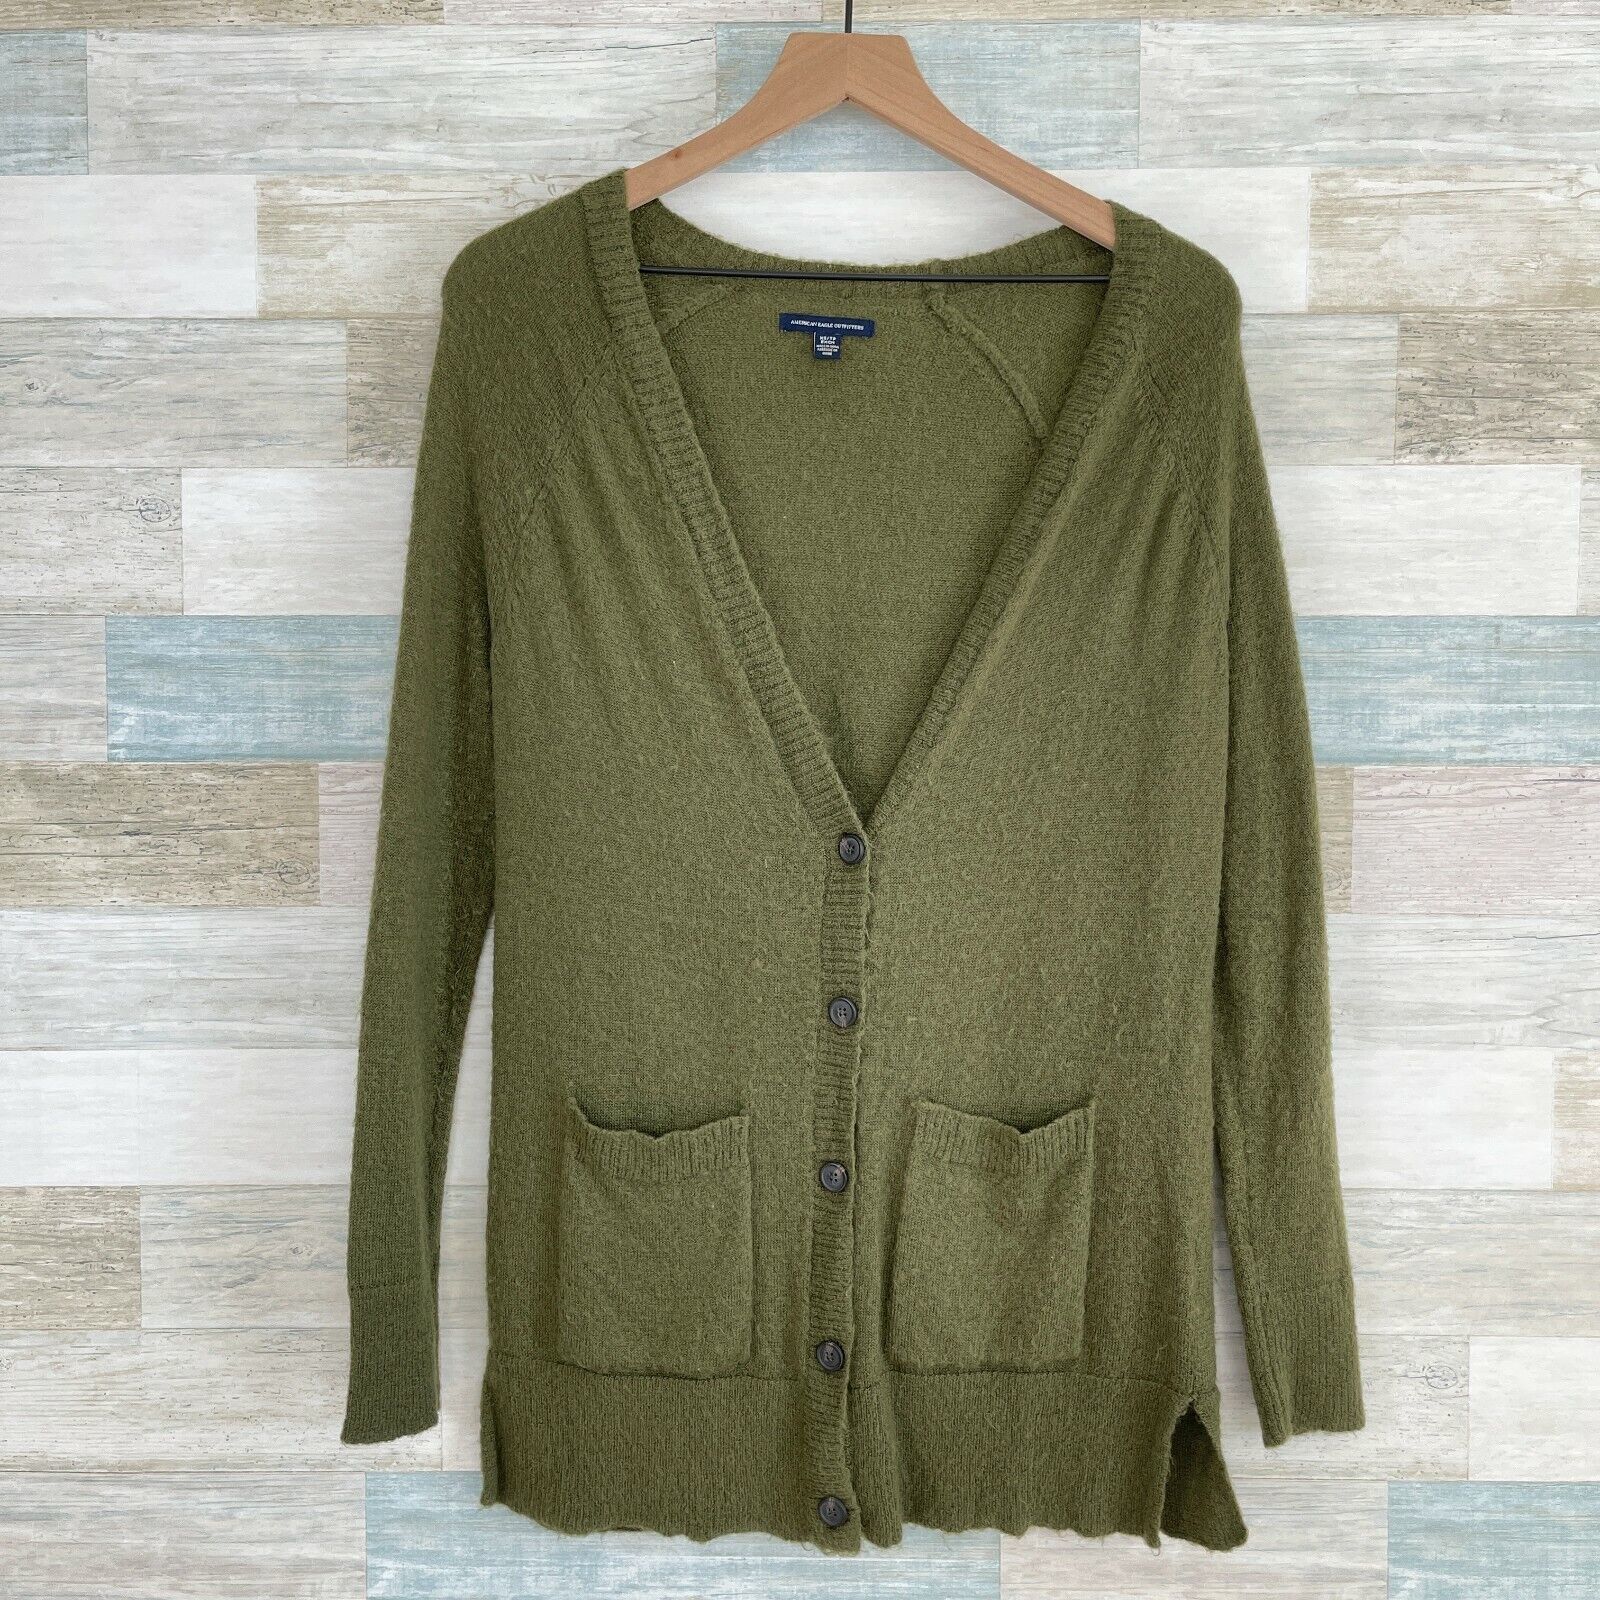 Primary image for American Eagle Grandpa Tunic Cardigan Sweater Green Stretchy Soft Women XS